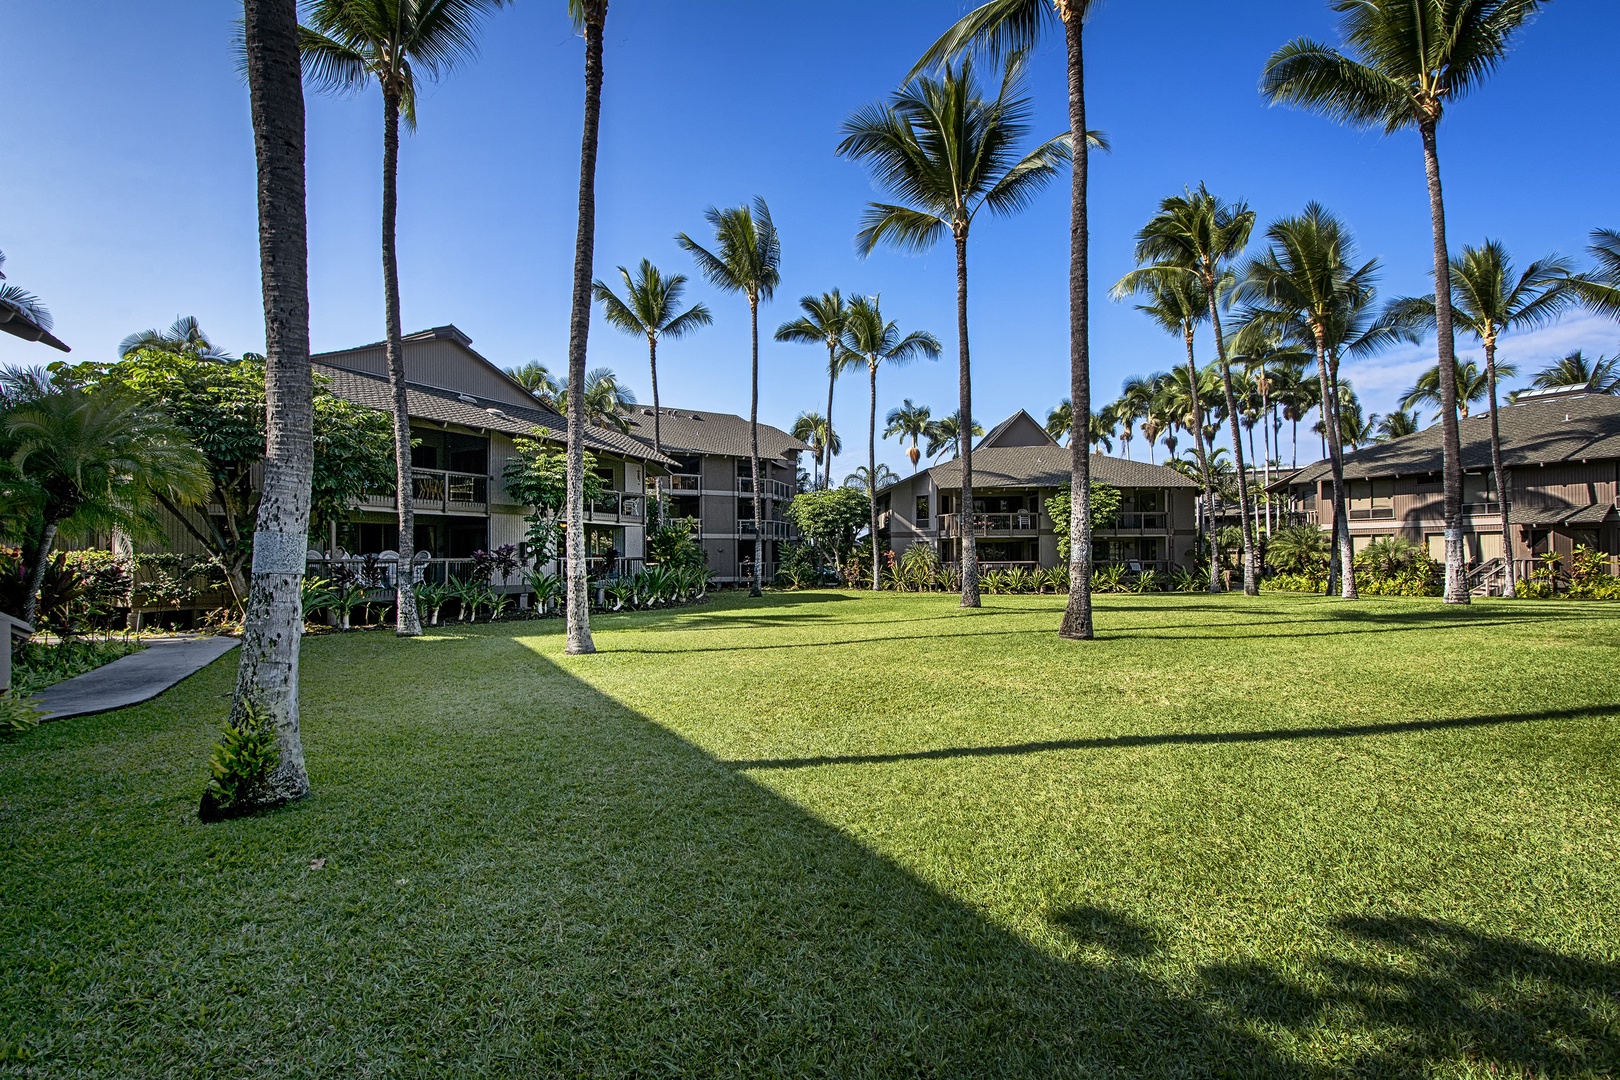 Kailua Kona Vacation Rentals, Kanaloa 701 - This condominium is situated on the fairway of the Kona Country Club and just a short walk to the renowned Sam Choy restaurant. Kanaloa has everything you desire for your dream Hawaiian vacation stay.